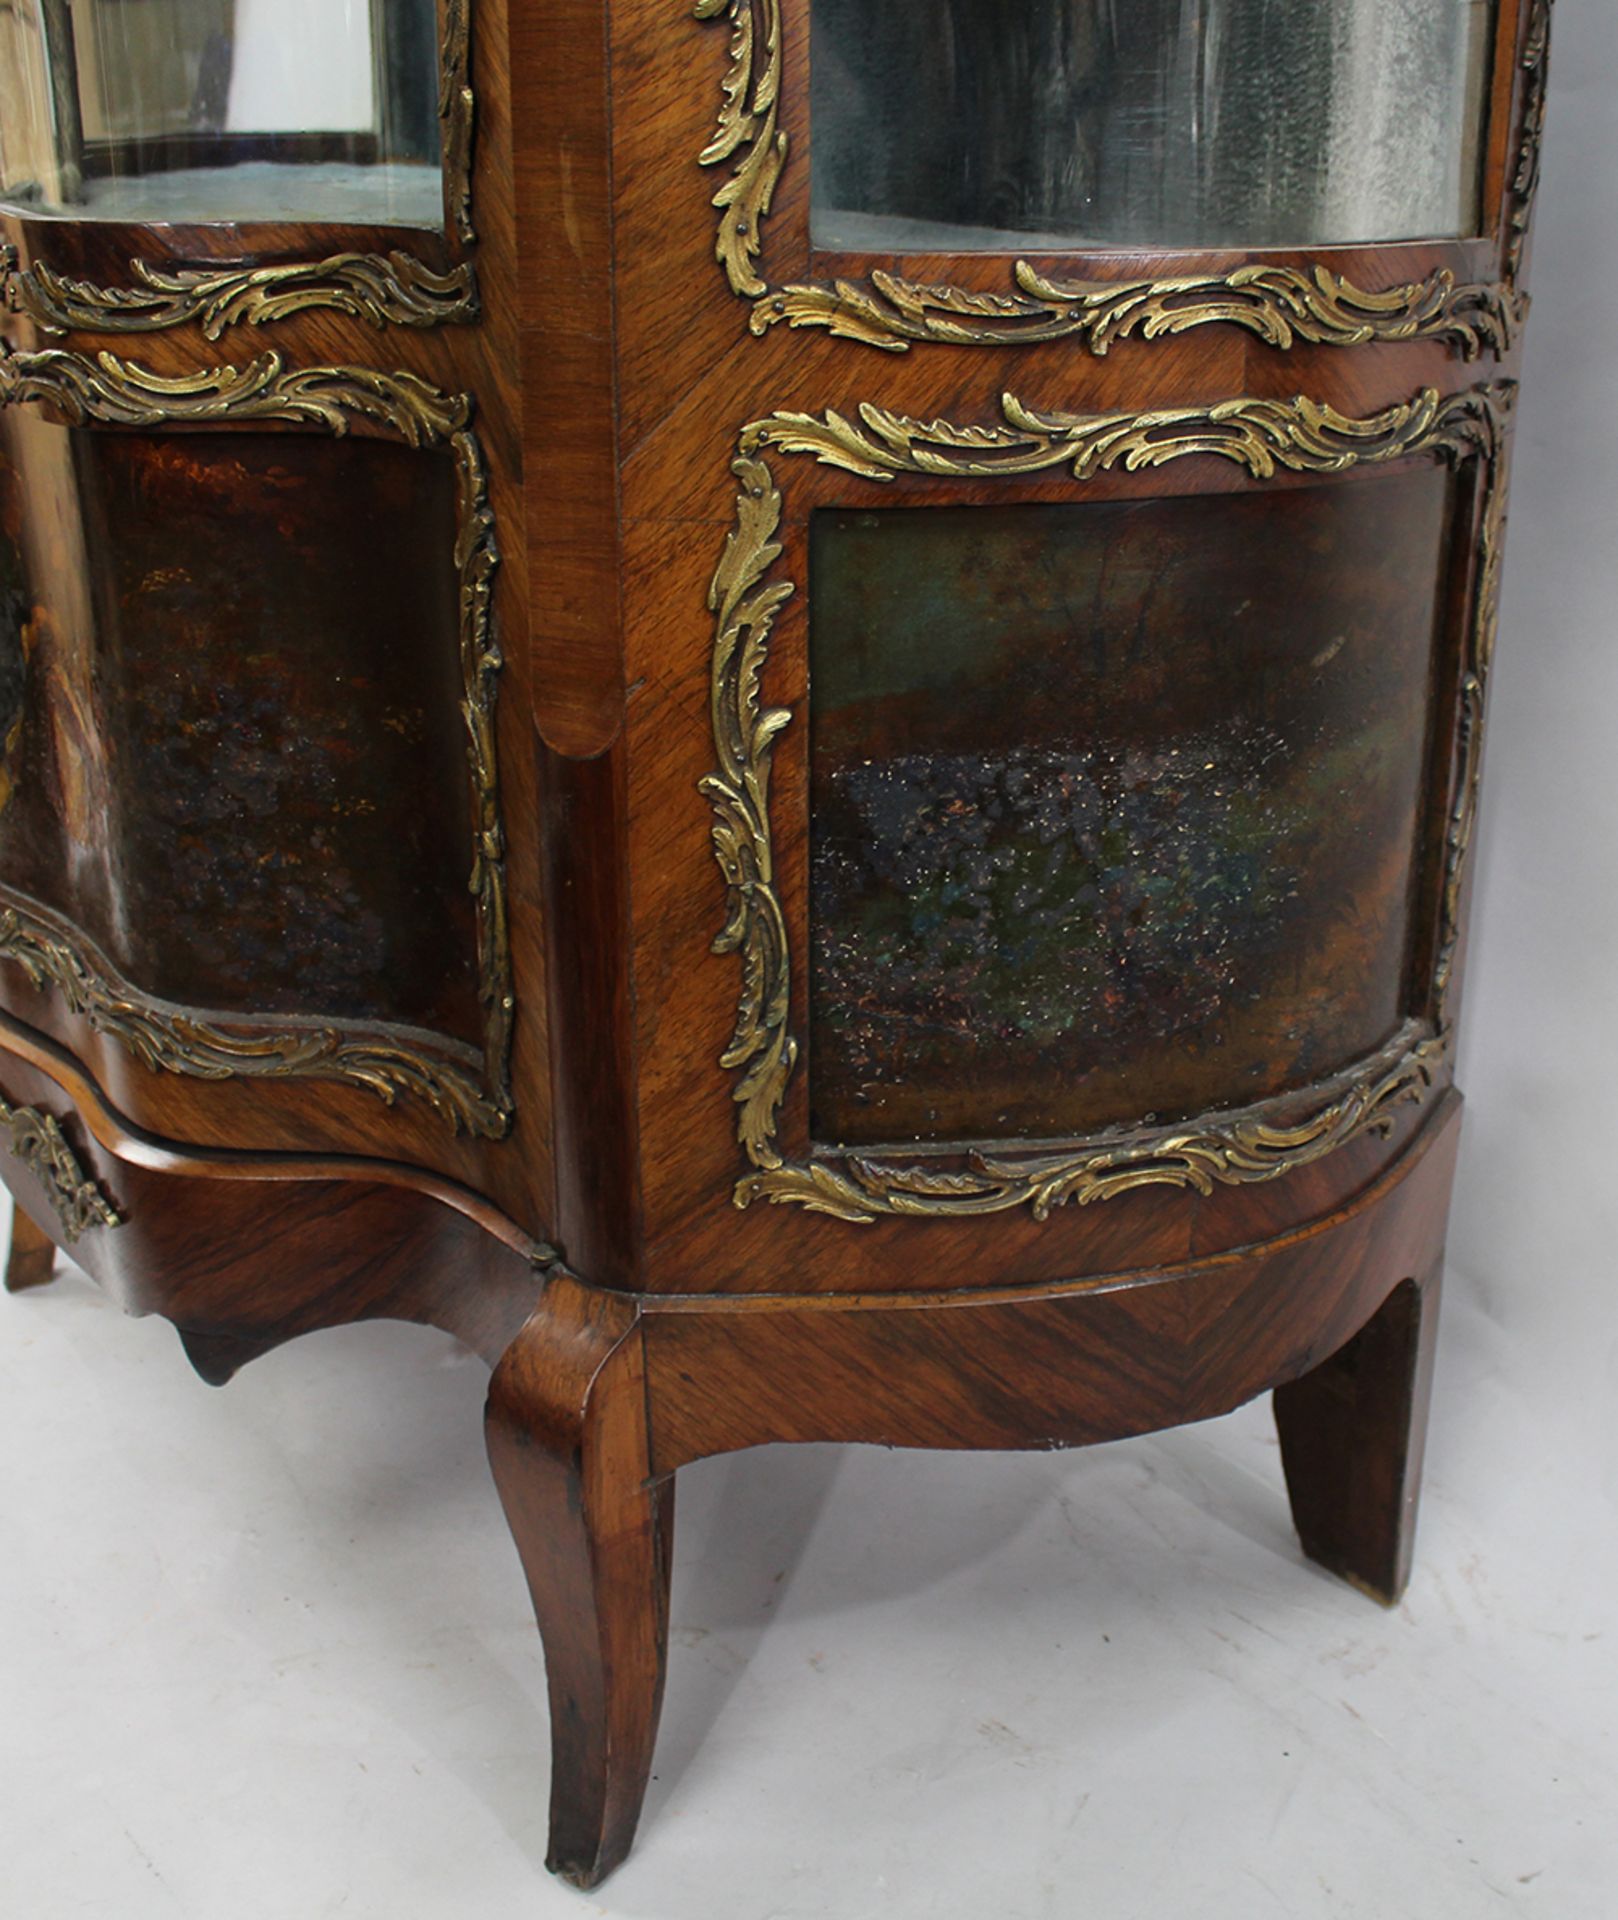 Antique French Serpentine Vernis Martin Display Cabinet - Image 8 of 12